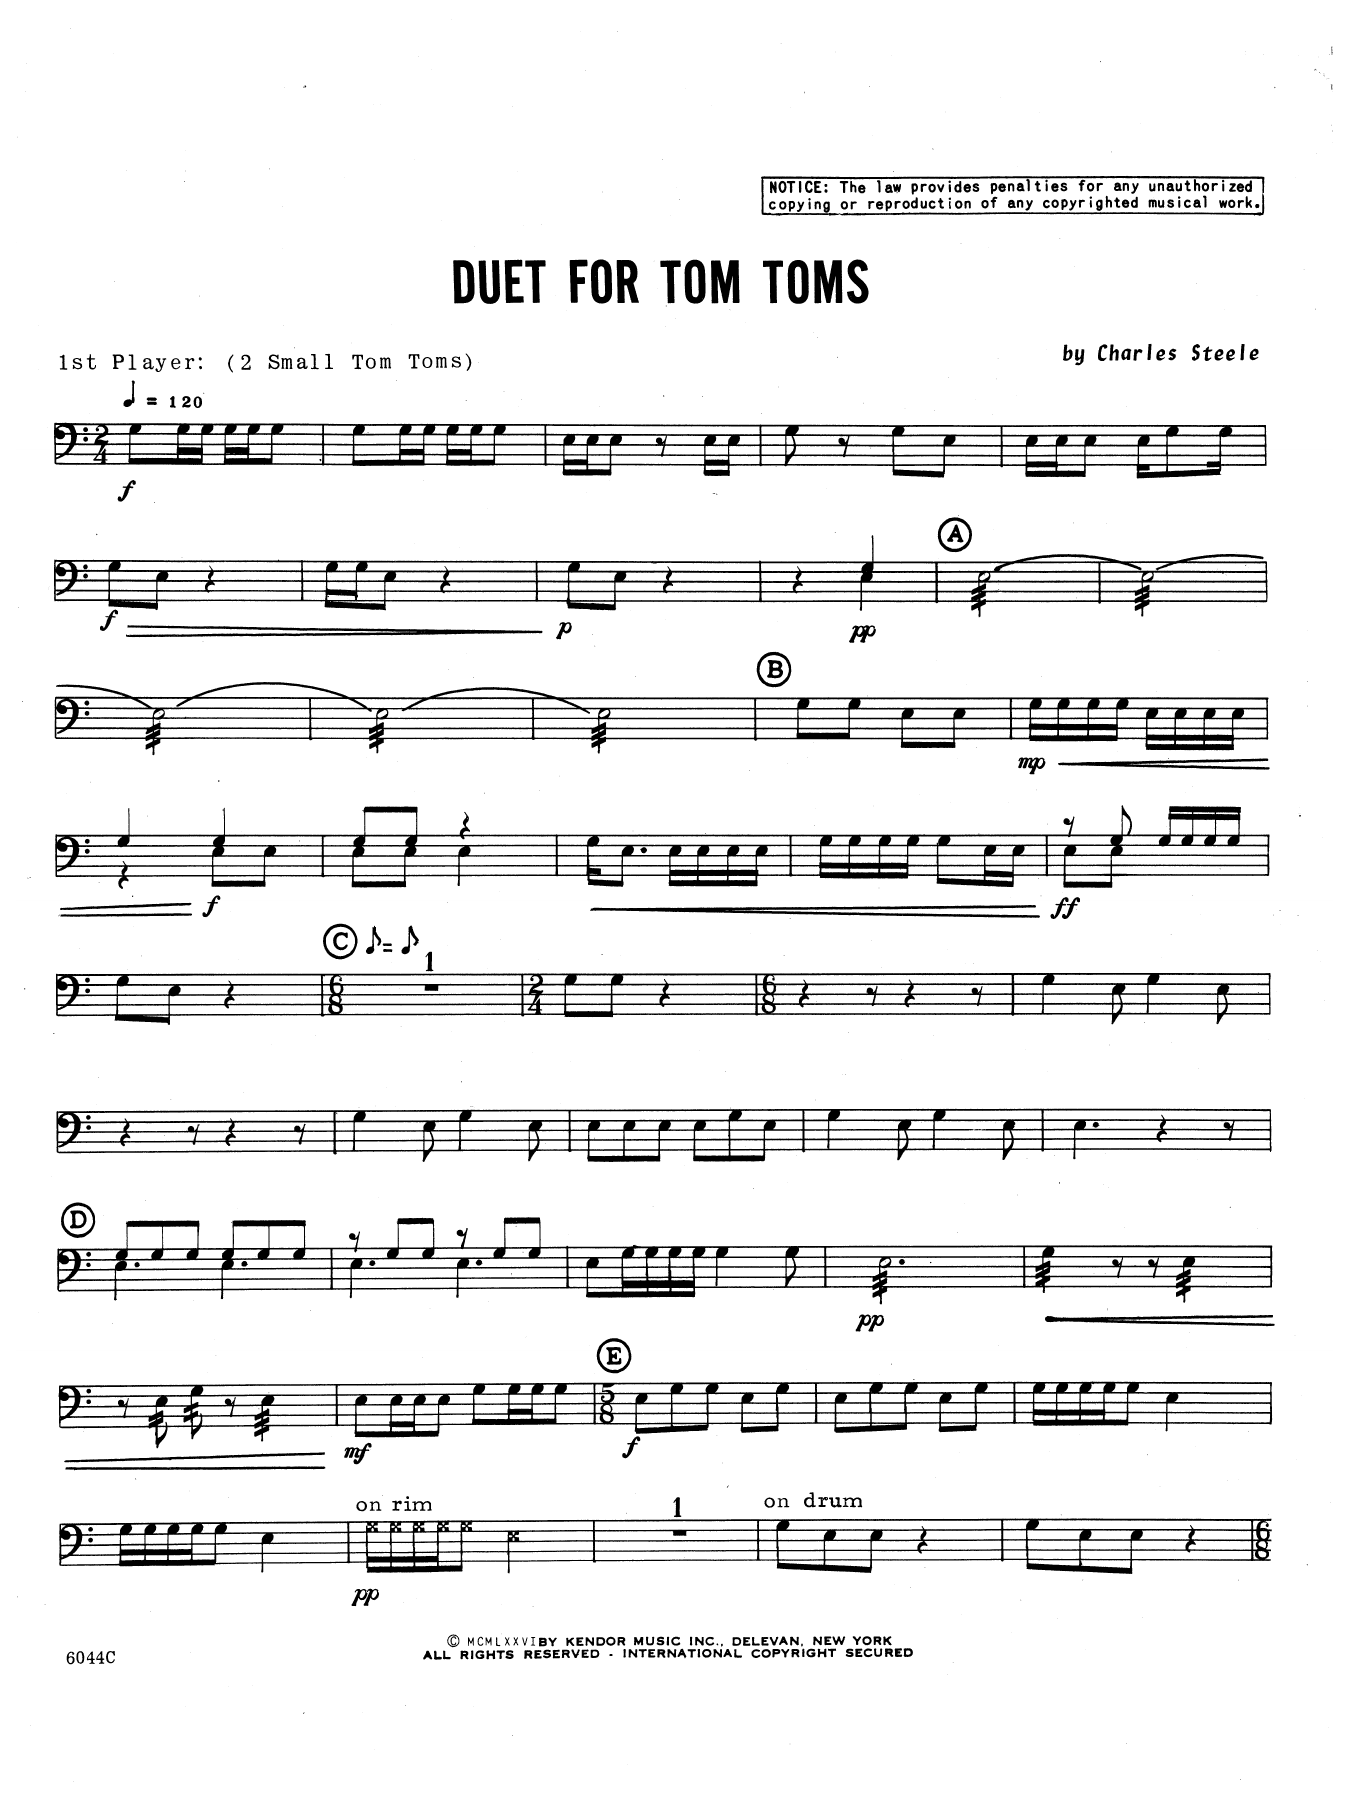 Download Charles Steele Duet For Tom Toms - Percussion 1 Sheet Music